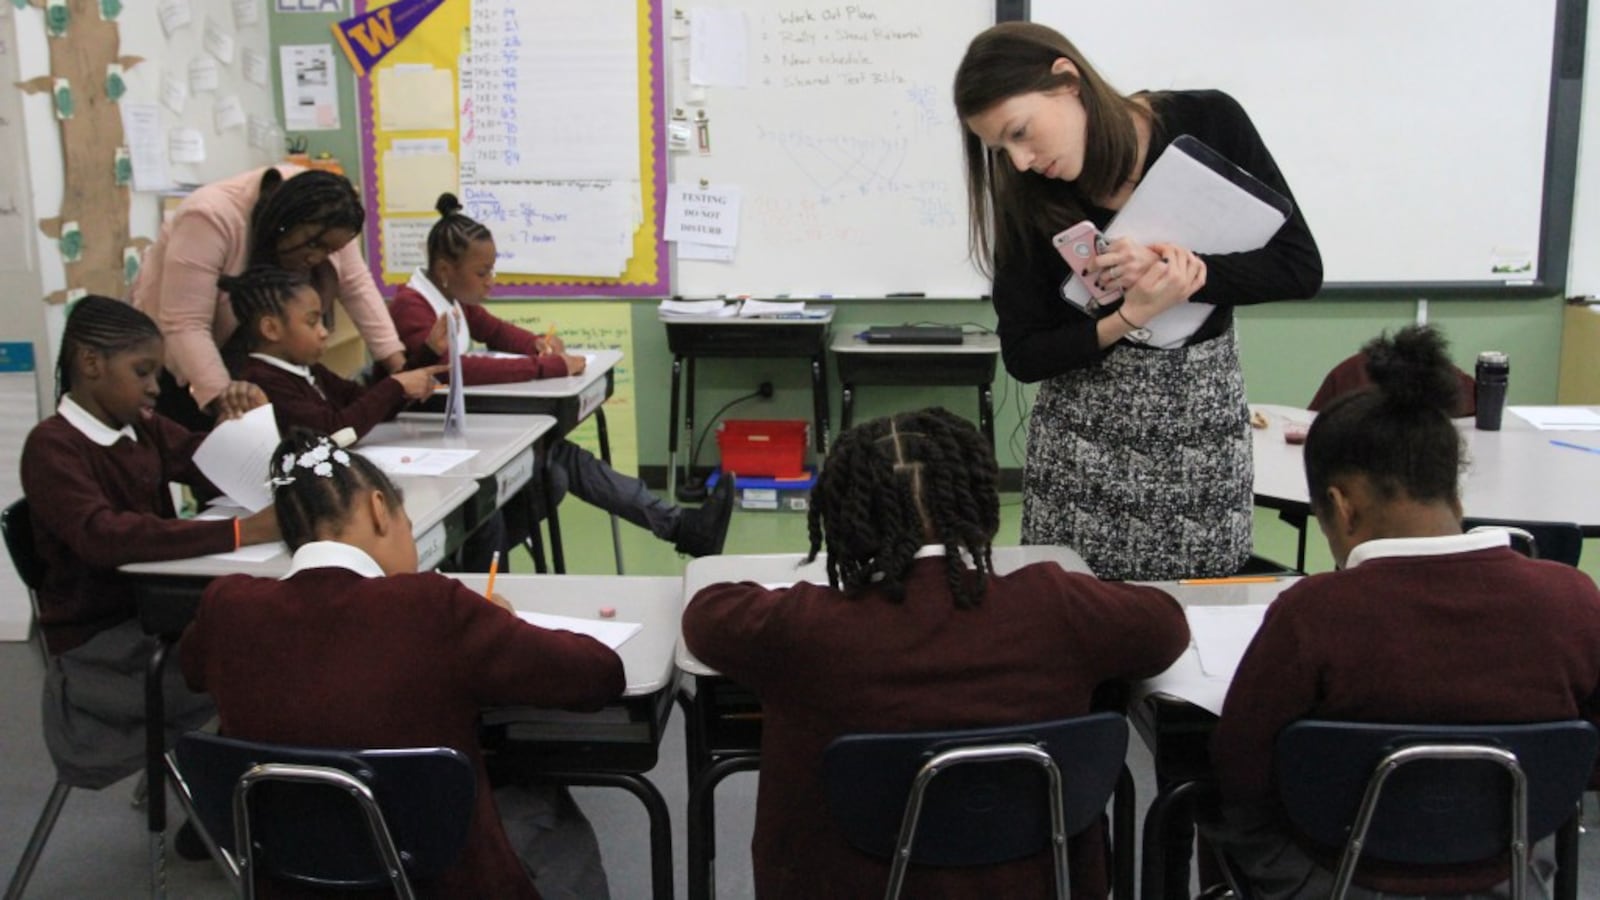 Erica Murphy, school director of Brownsville Ascend Lower Charter School in New York, oversees students in a fourth-grade English class.